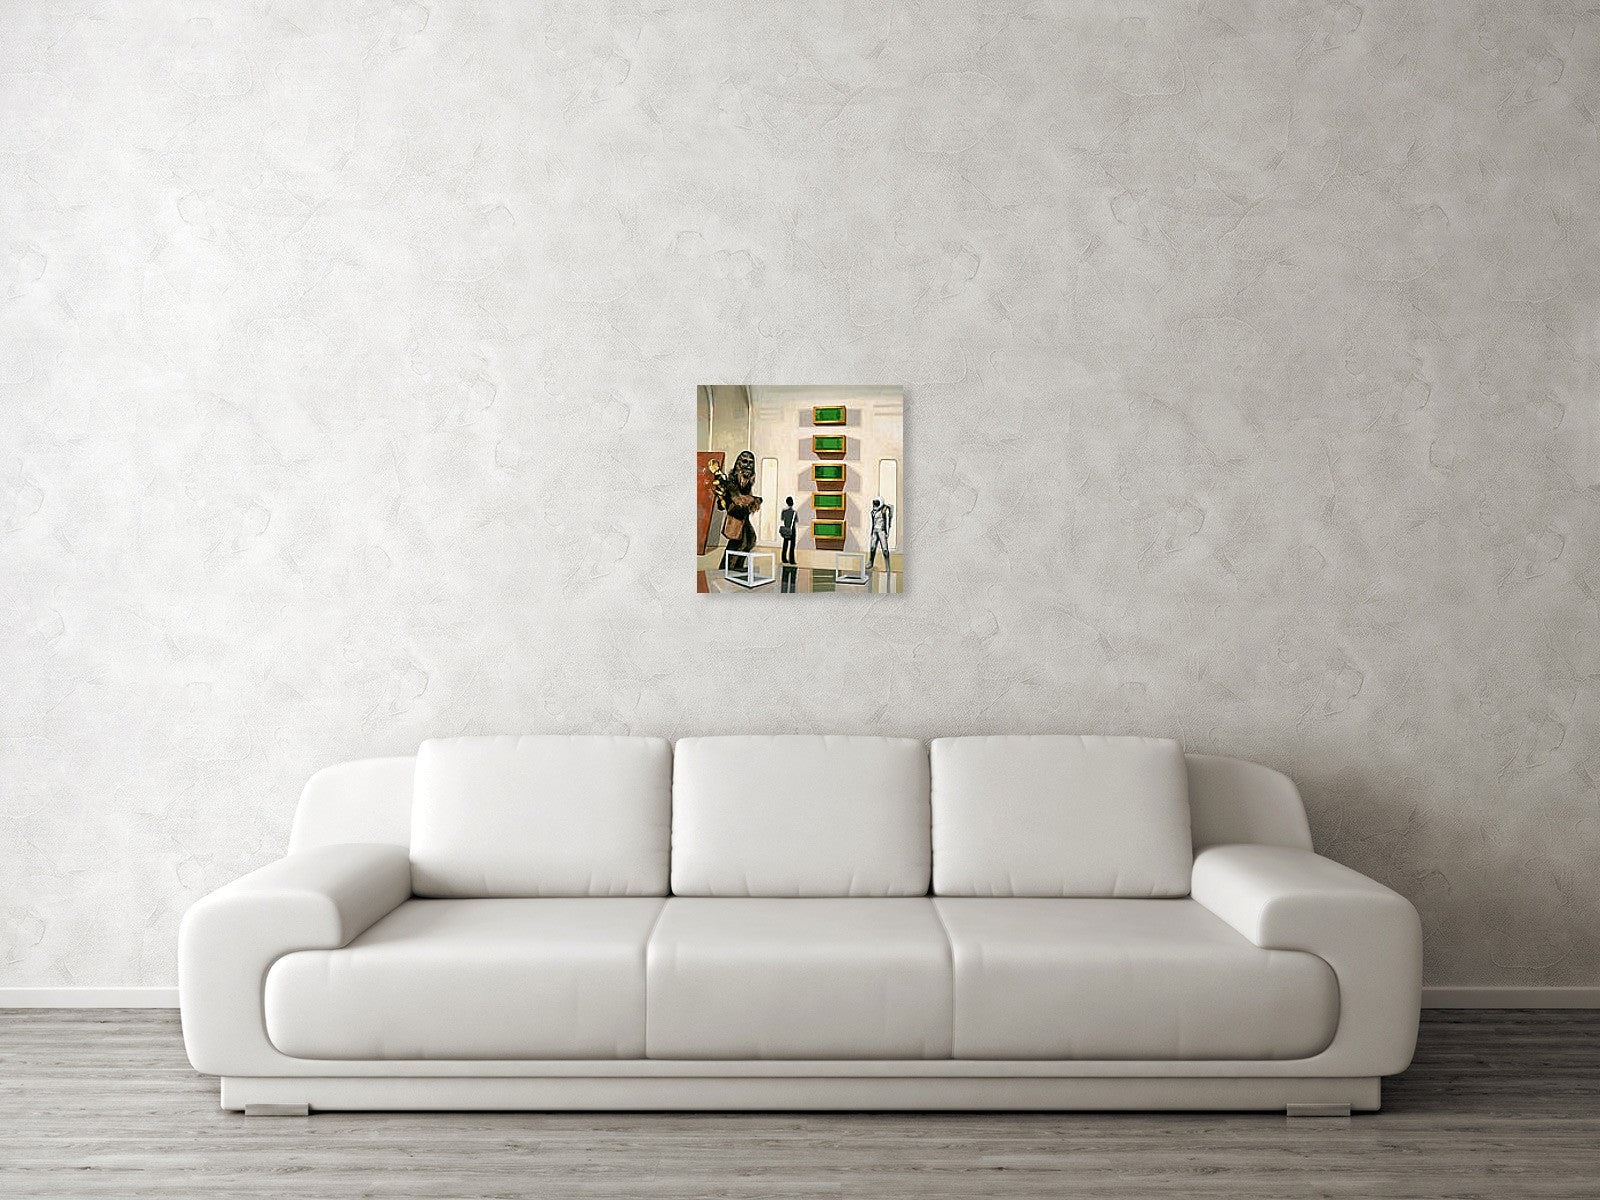 Chewbacca In Cloud City With Art Art Print Canvas And Poster, Warm Home Decor Wall Art Visual Art 1617268379340.jpg